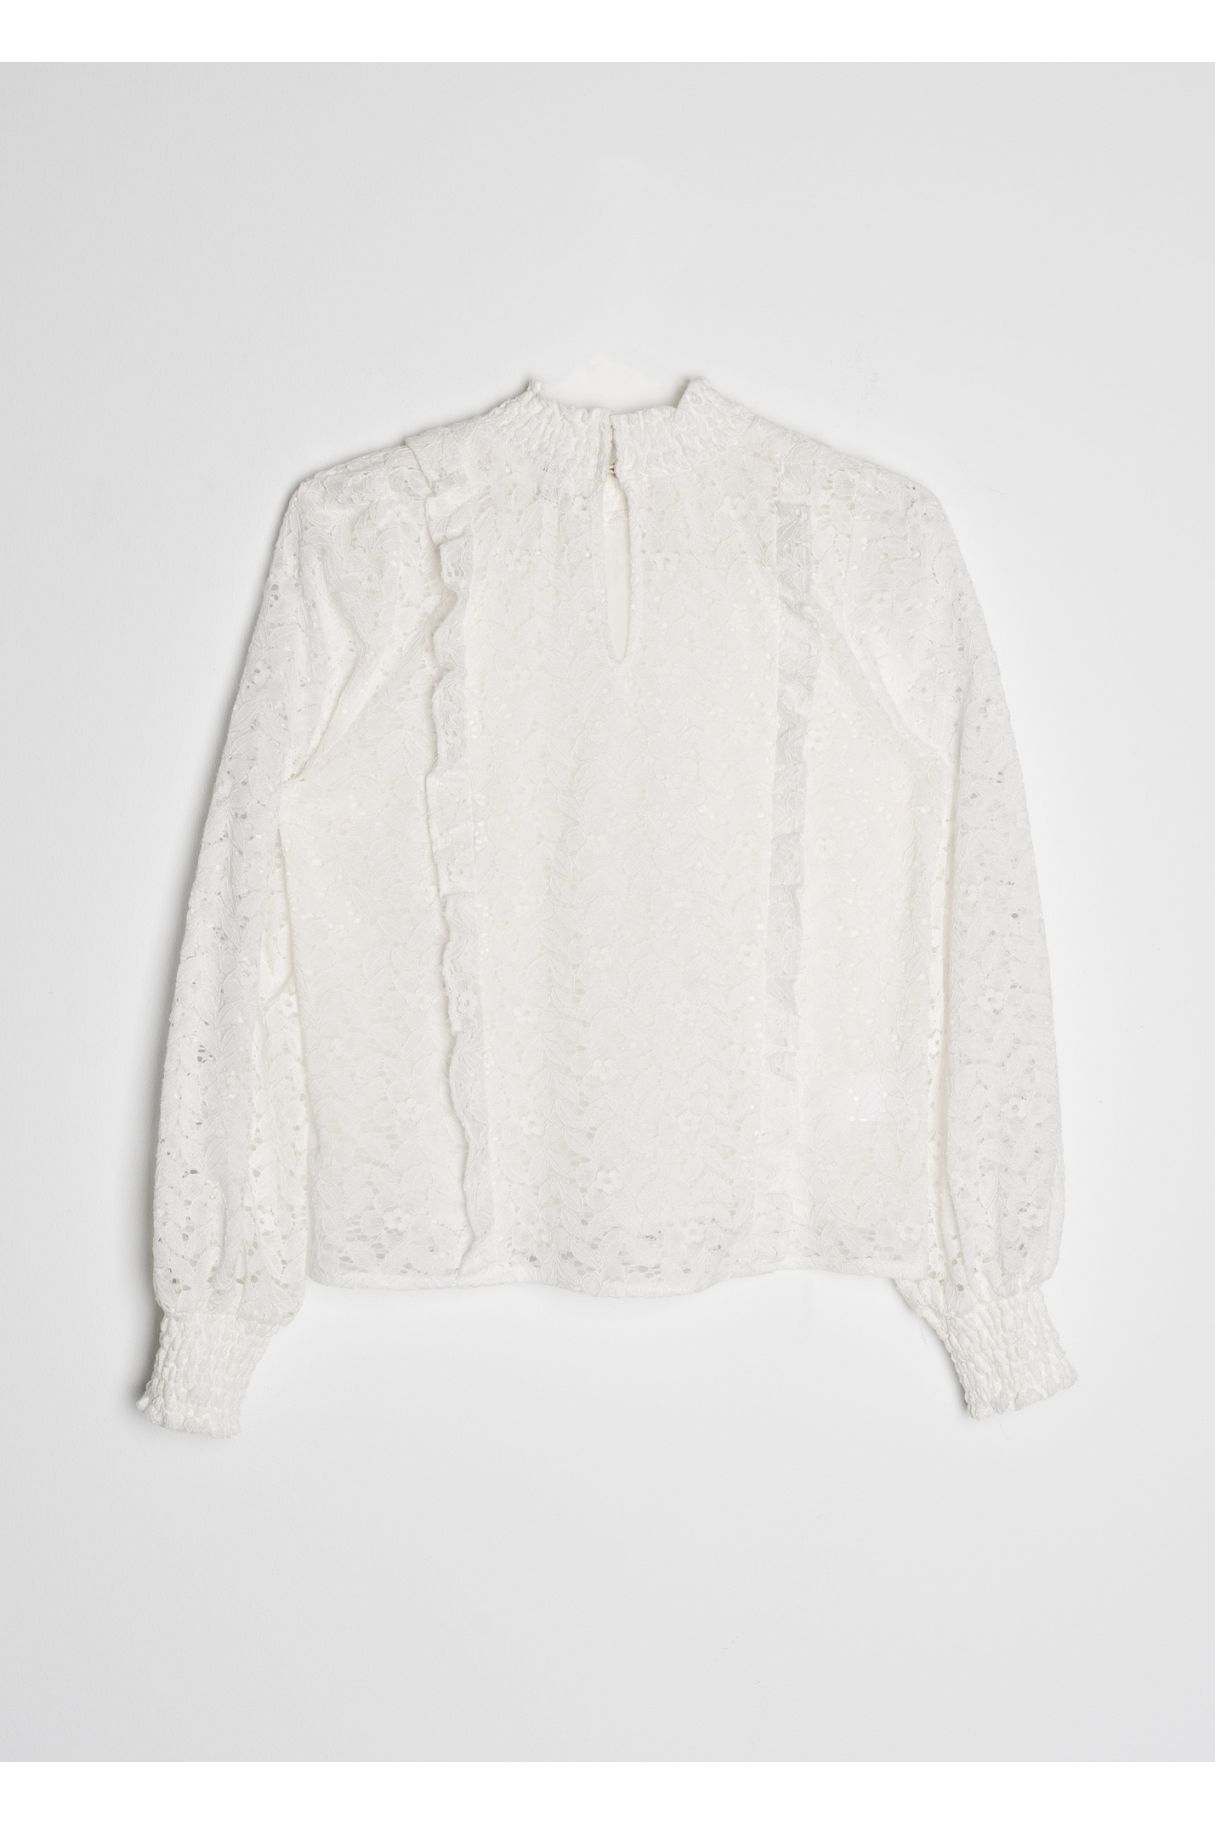 RUFFLED LACE TOP